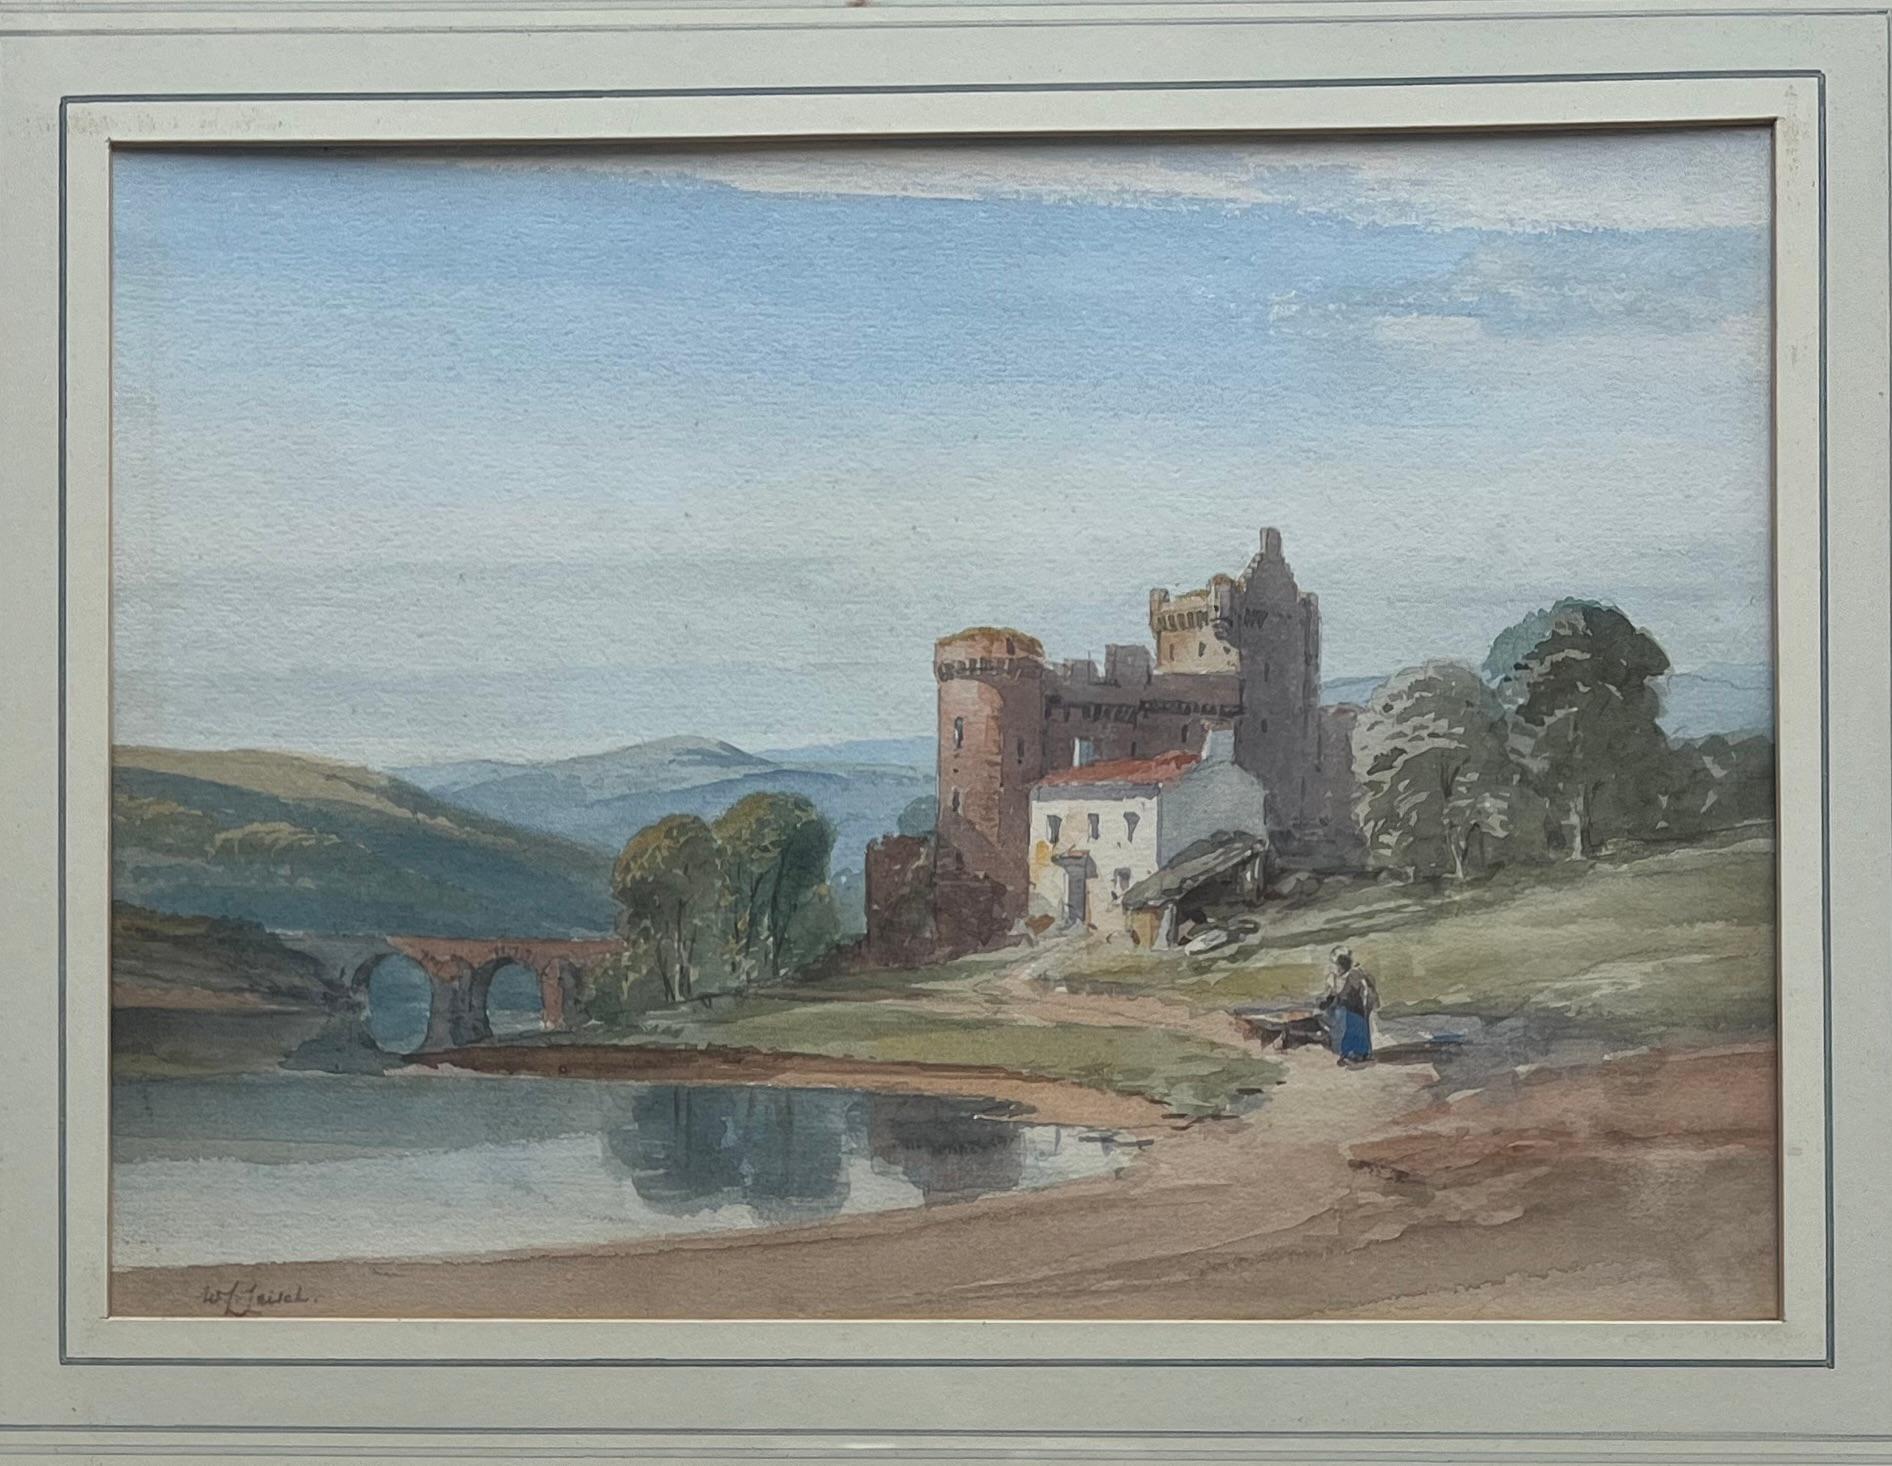 English School watercolour, A figure by a Scottish castle and loch - Art by William Leighton Leitch